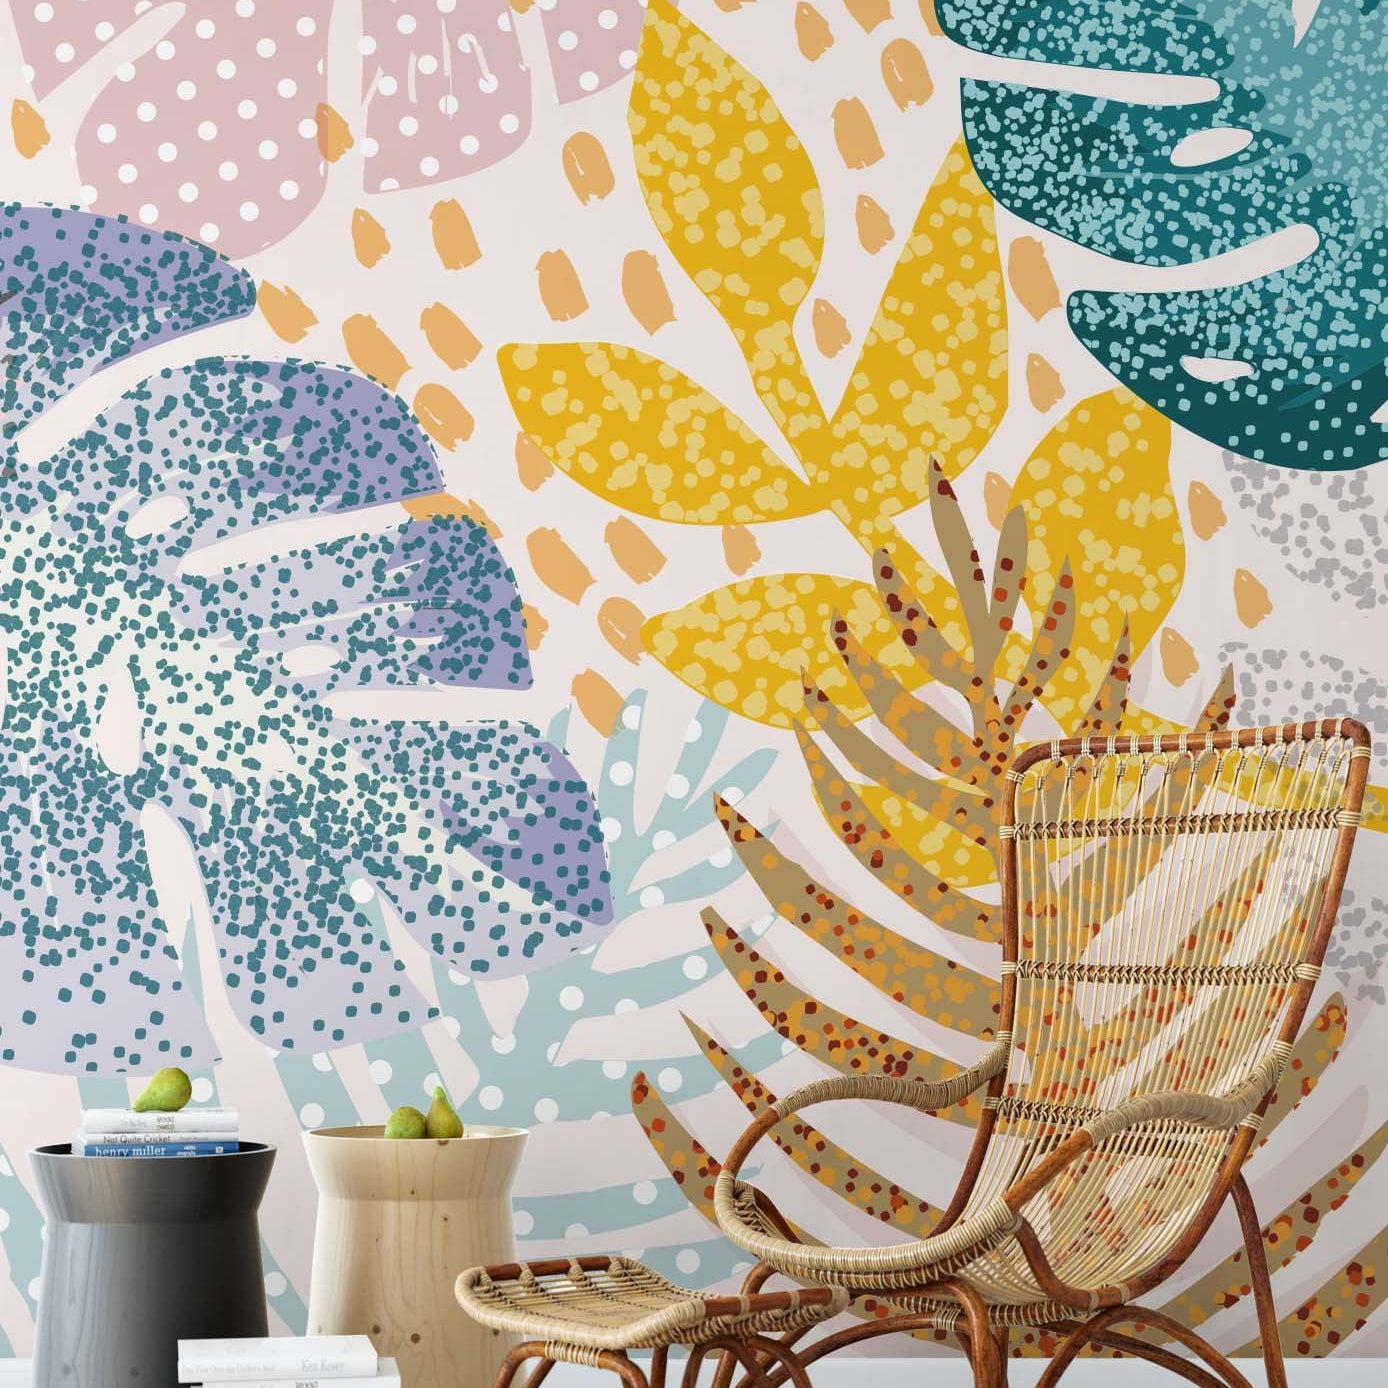 3D Hand Sketching Colorful Giant Leaves Wall Mural Wallpaper LXL 1107- Jess Art Decoration